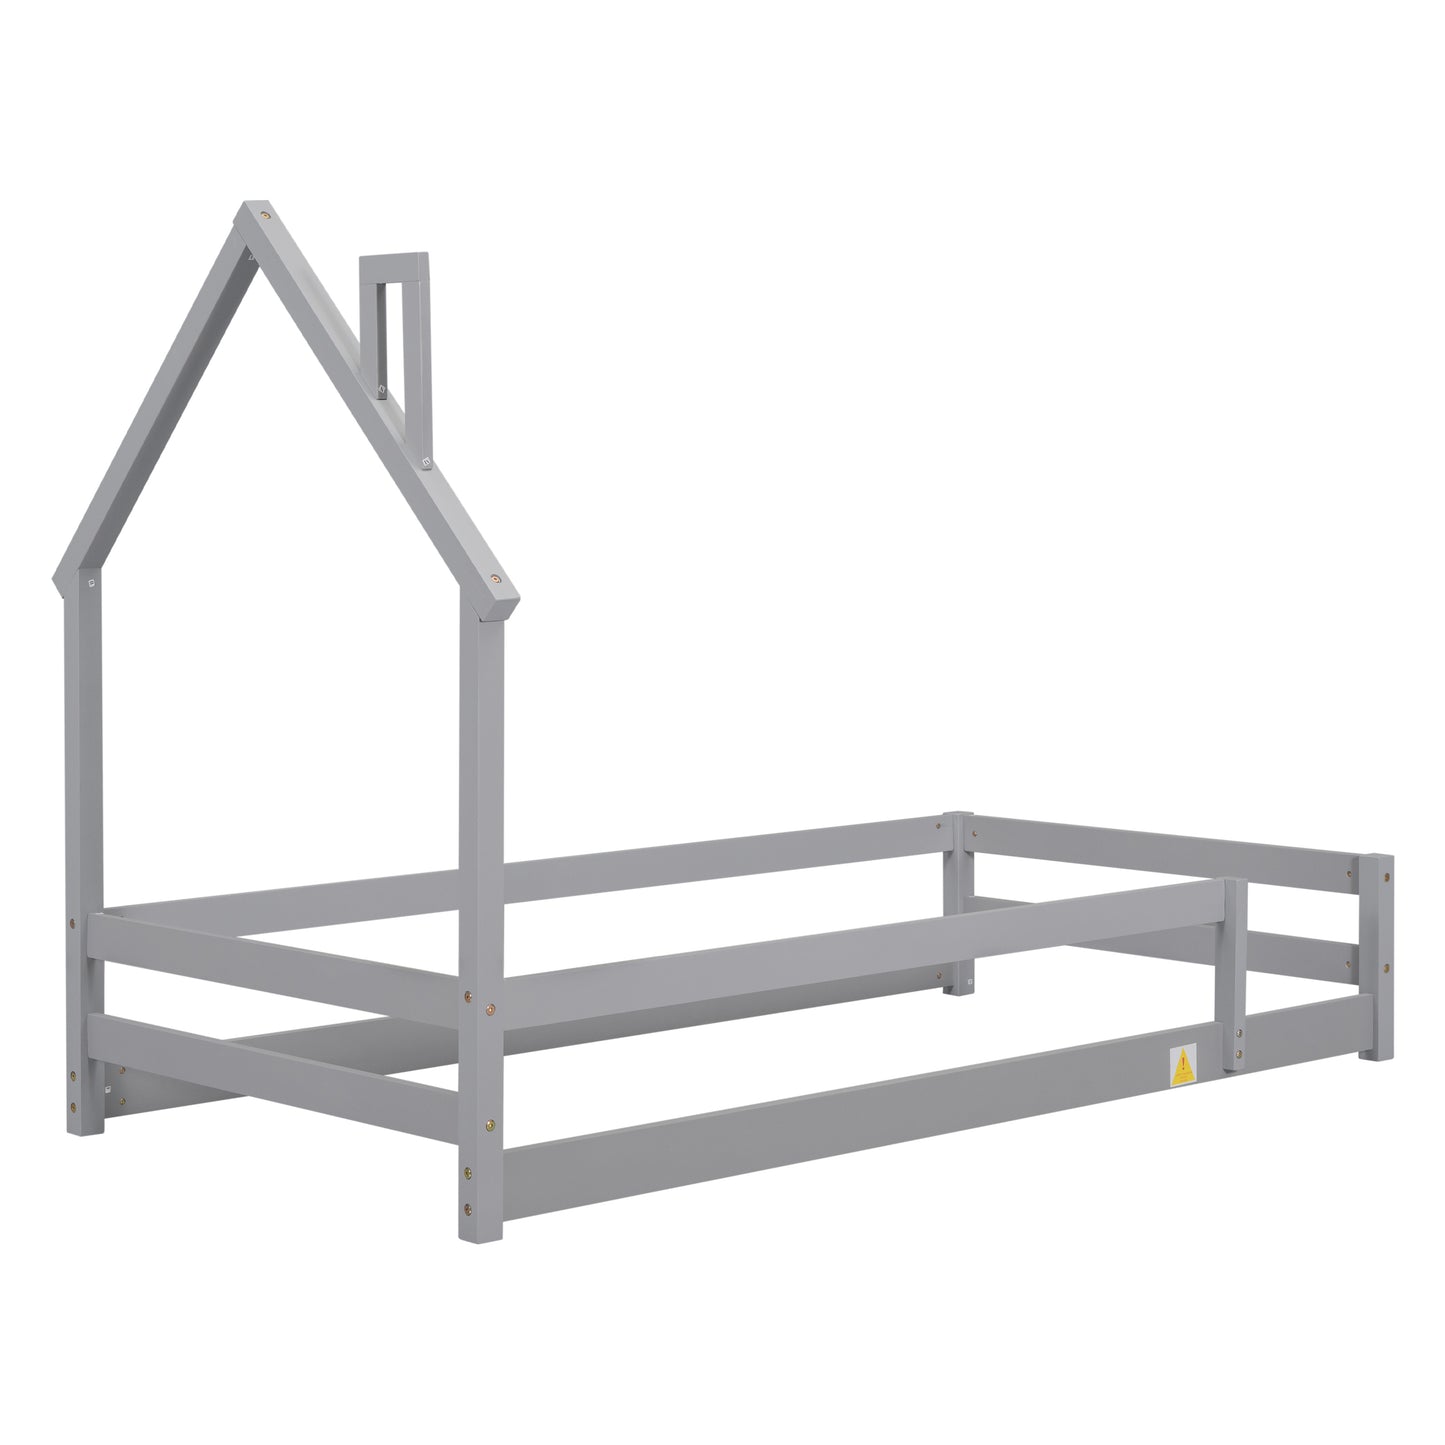 Twin Size Wood Platform bed with House-shaped Headboard & Fences - Gray